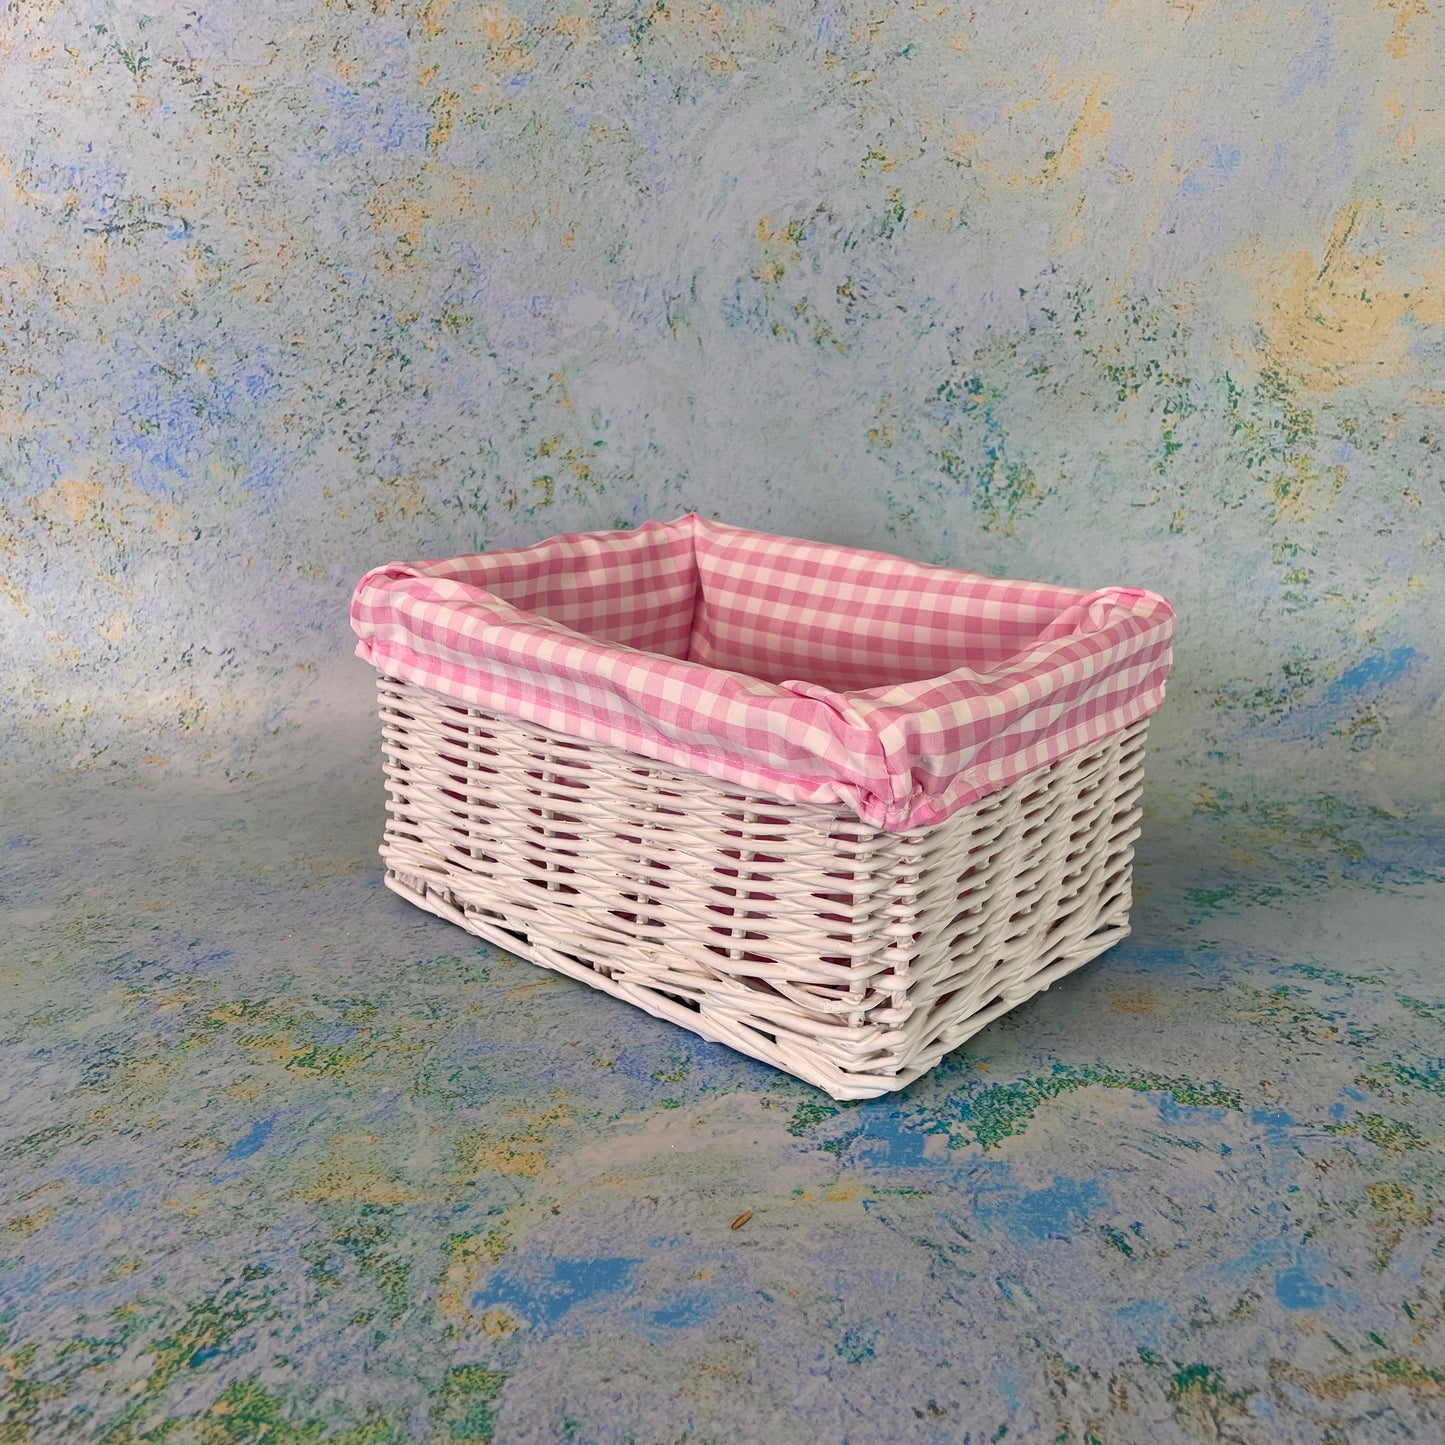 New Baby Gift Basket Kit with Pink Gingham